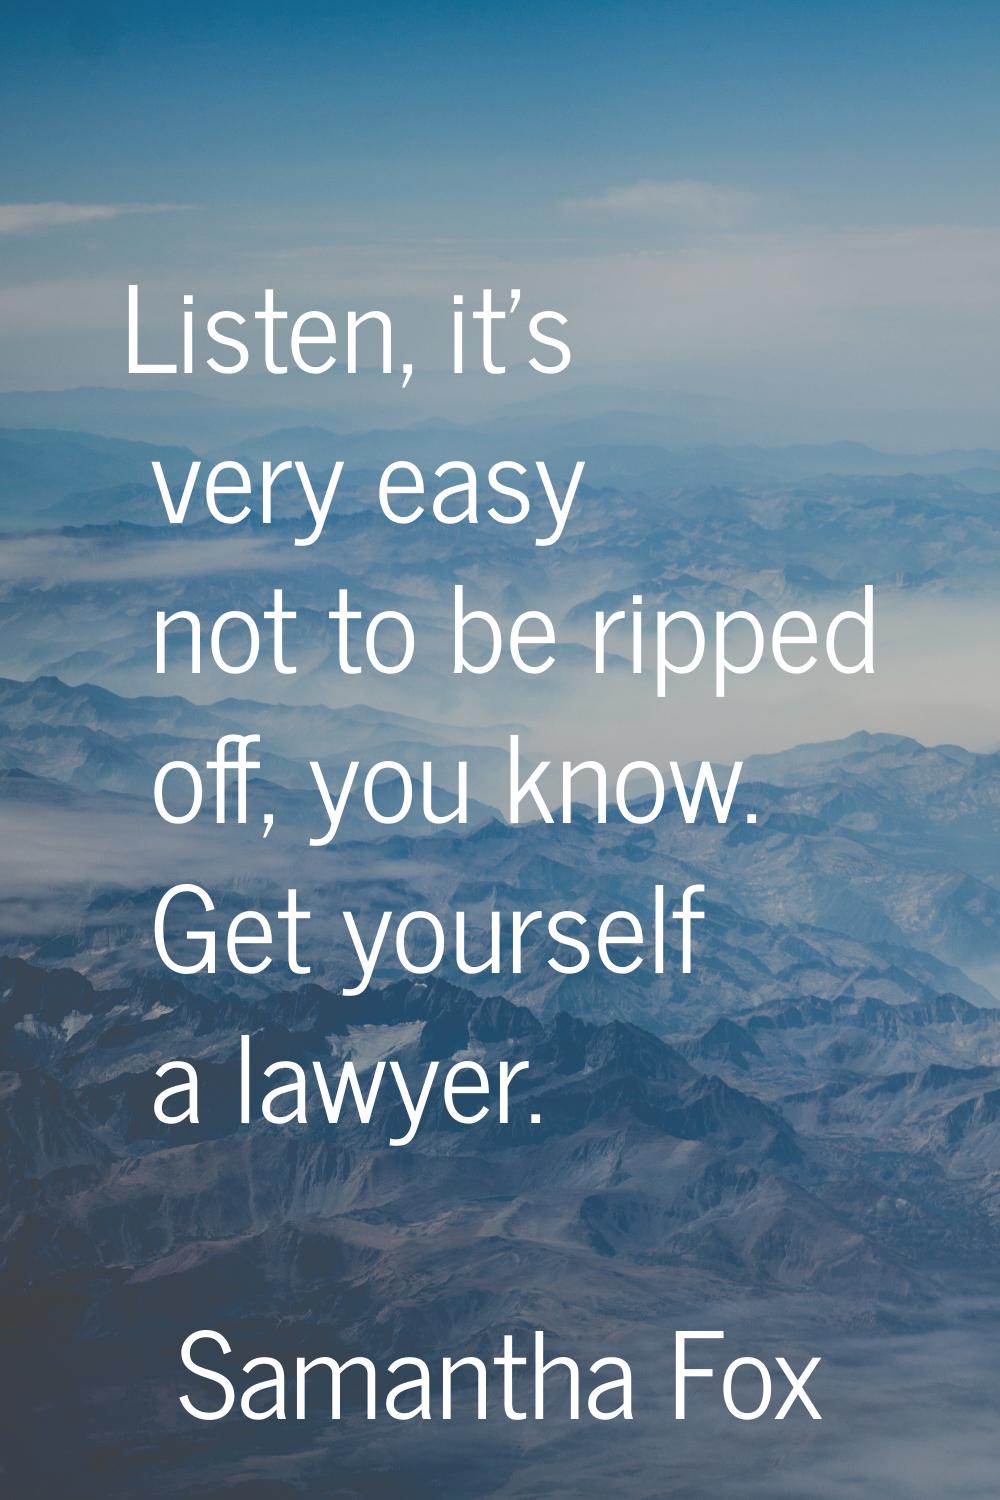 Listen, it's very easy not to be ripped off, you know. Get yourself a lawyer.